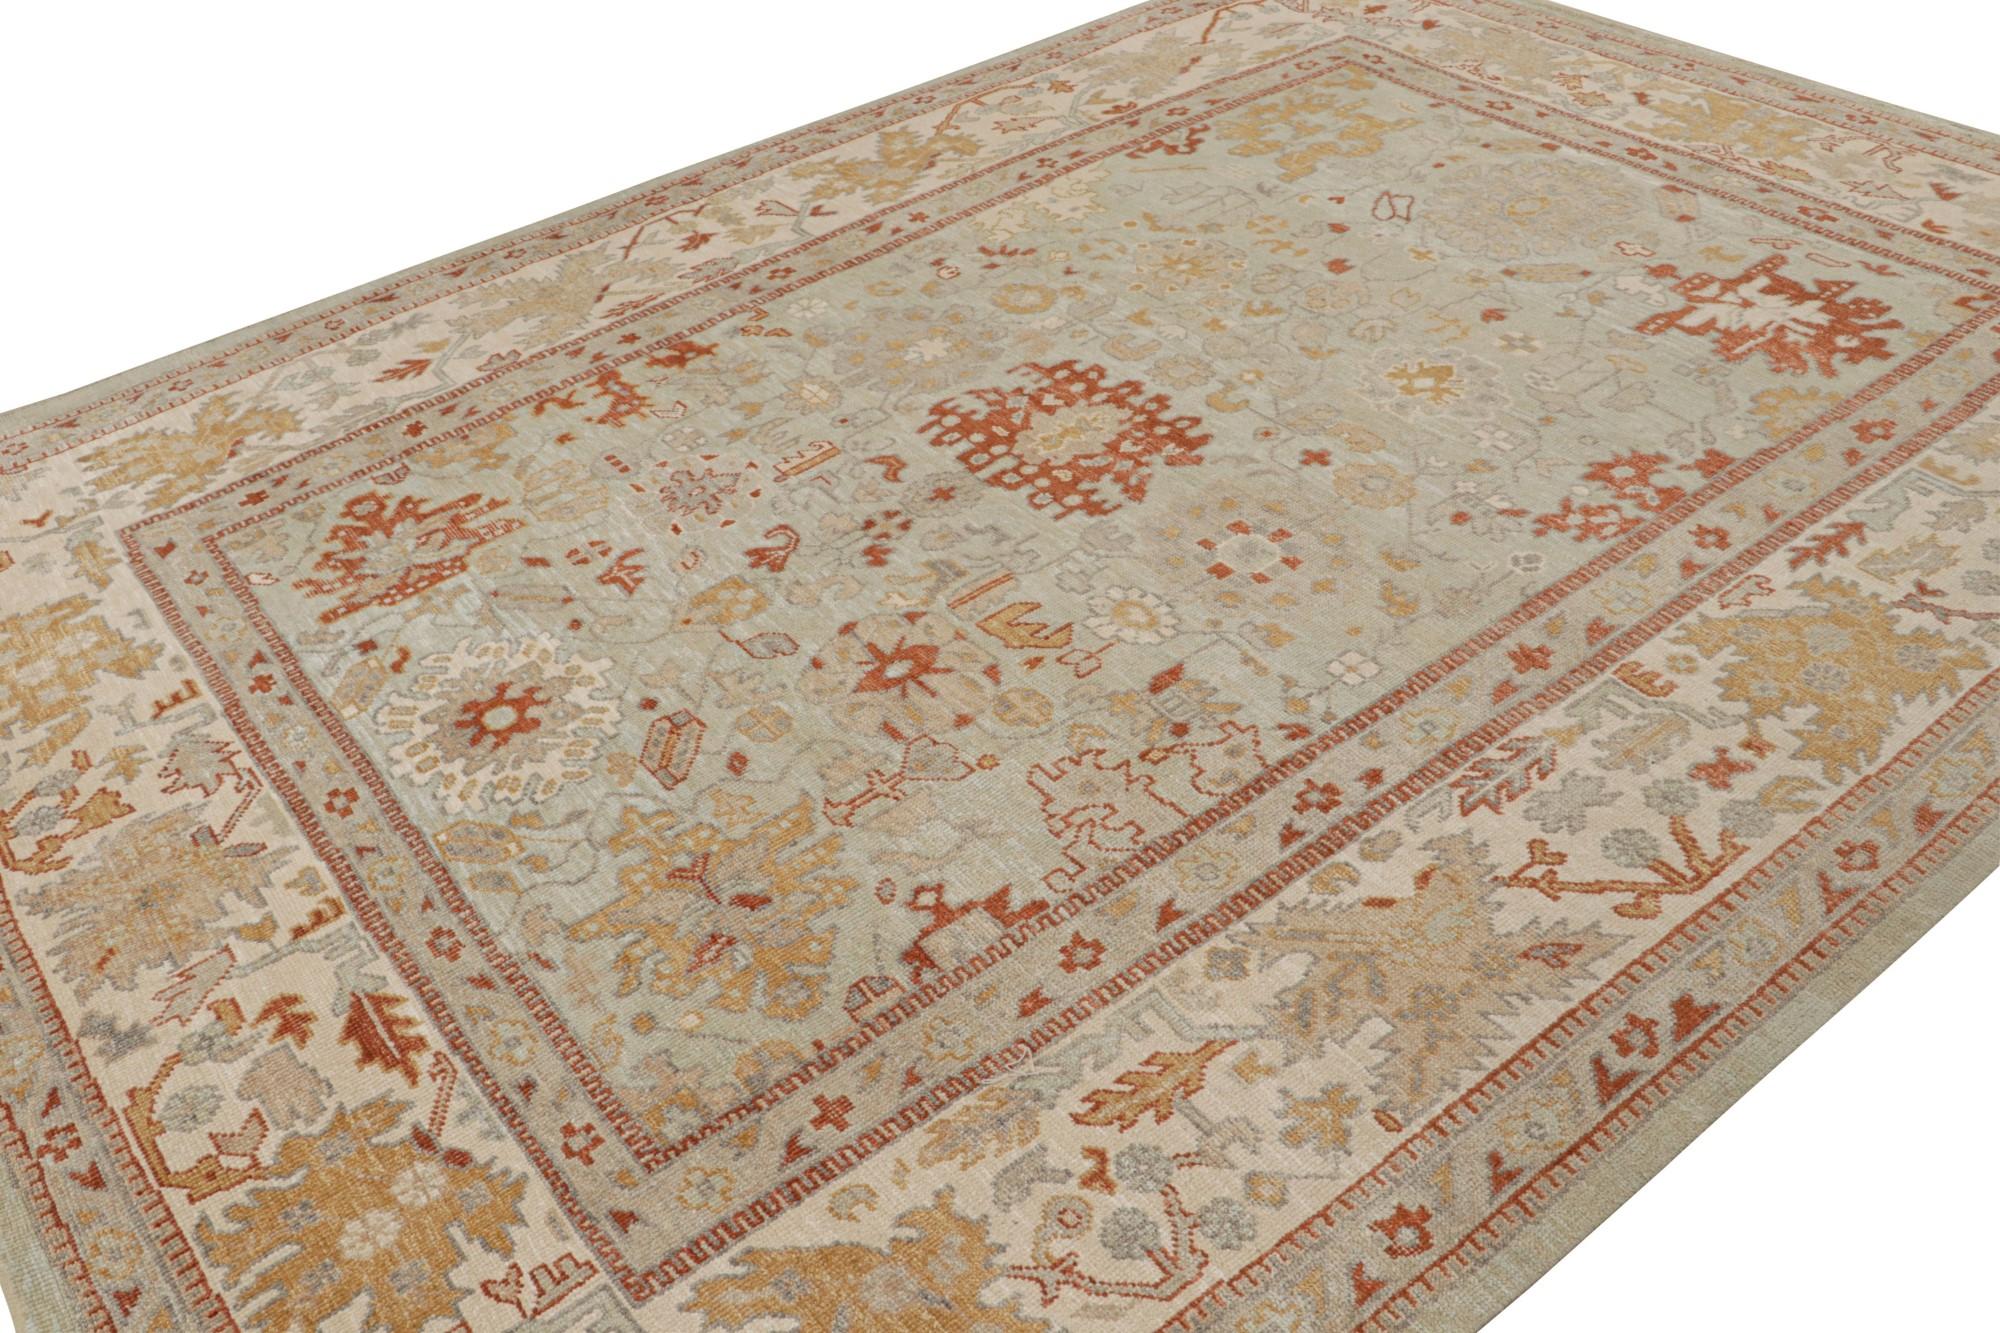 This 9x12 rug from the Modern Classics Collection by Rug & Kilim is from a new line inspired by antique Oushak rugs. Hand-knotted in wool & sari silk, its design enjoys beige, gold & sky blue toned floral patterns.  

On the Design: 

The rug is